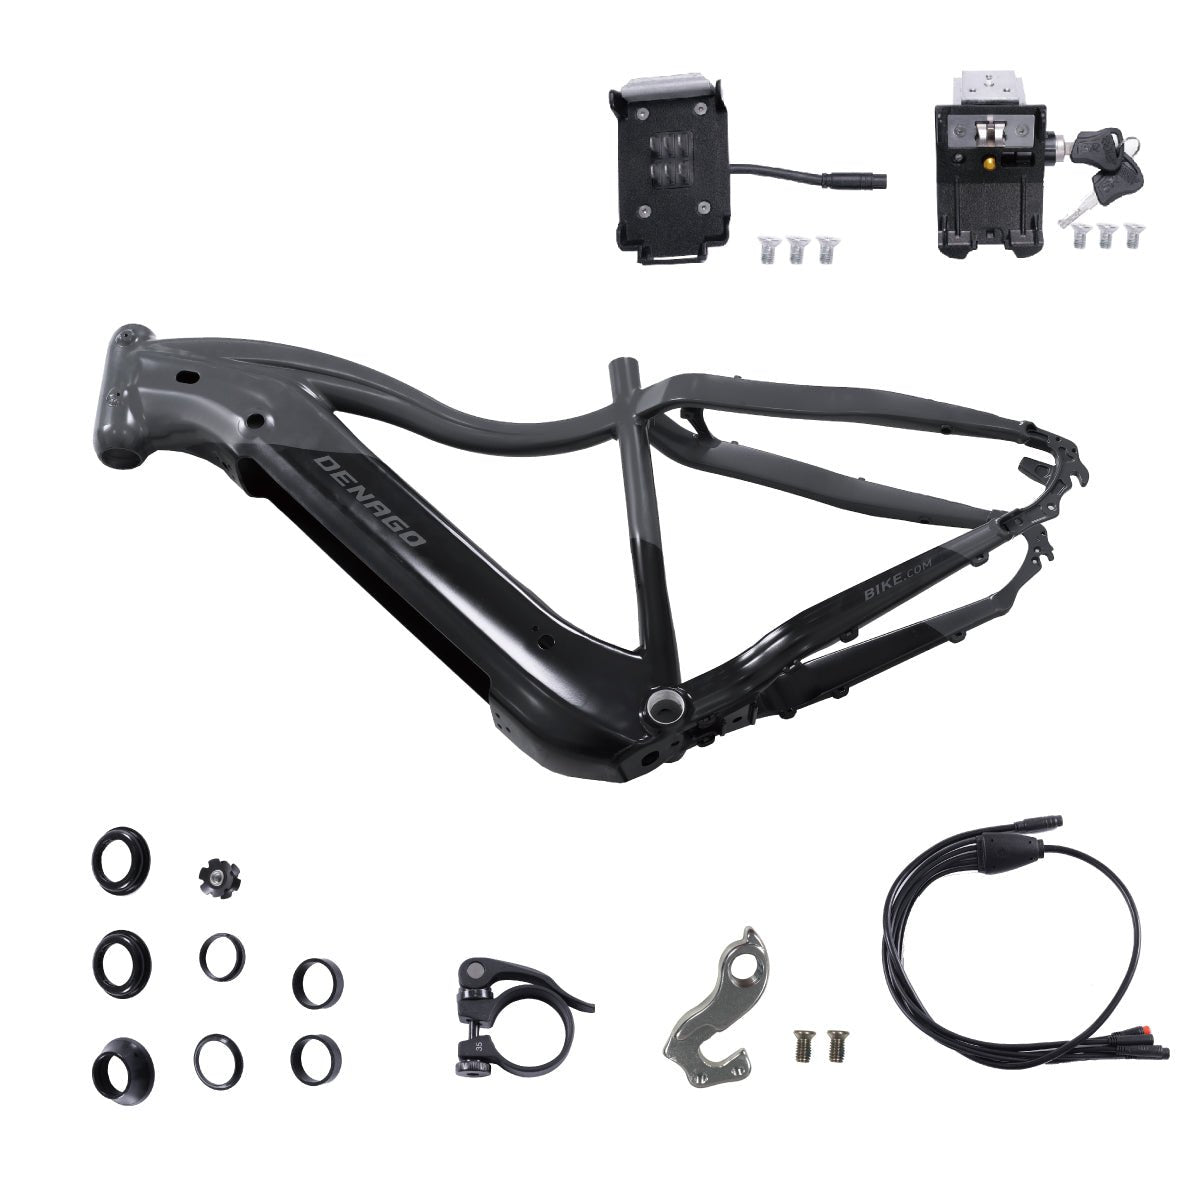 Denago FAT Tire Frame Replacement- 3 sizing options